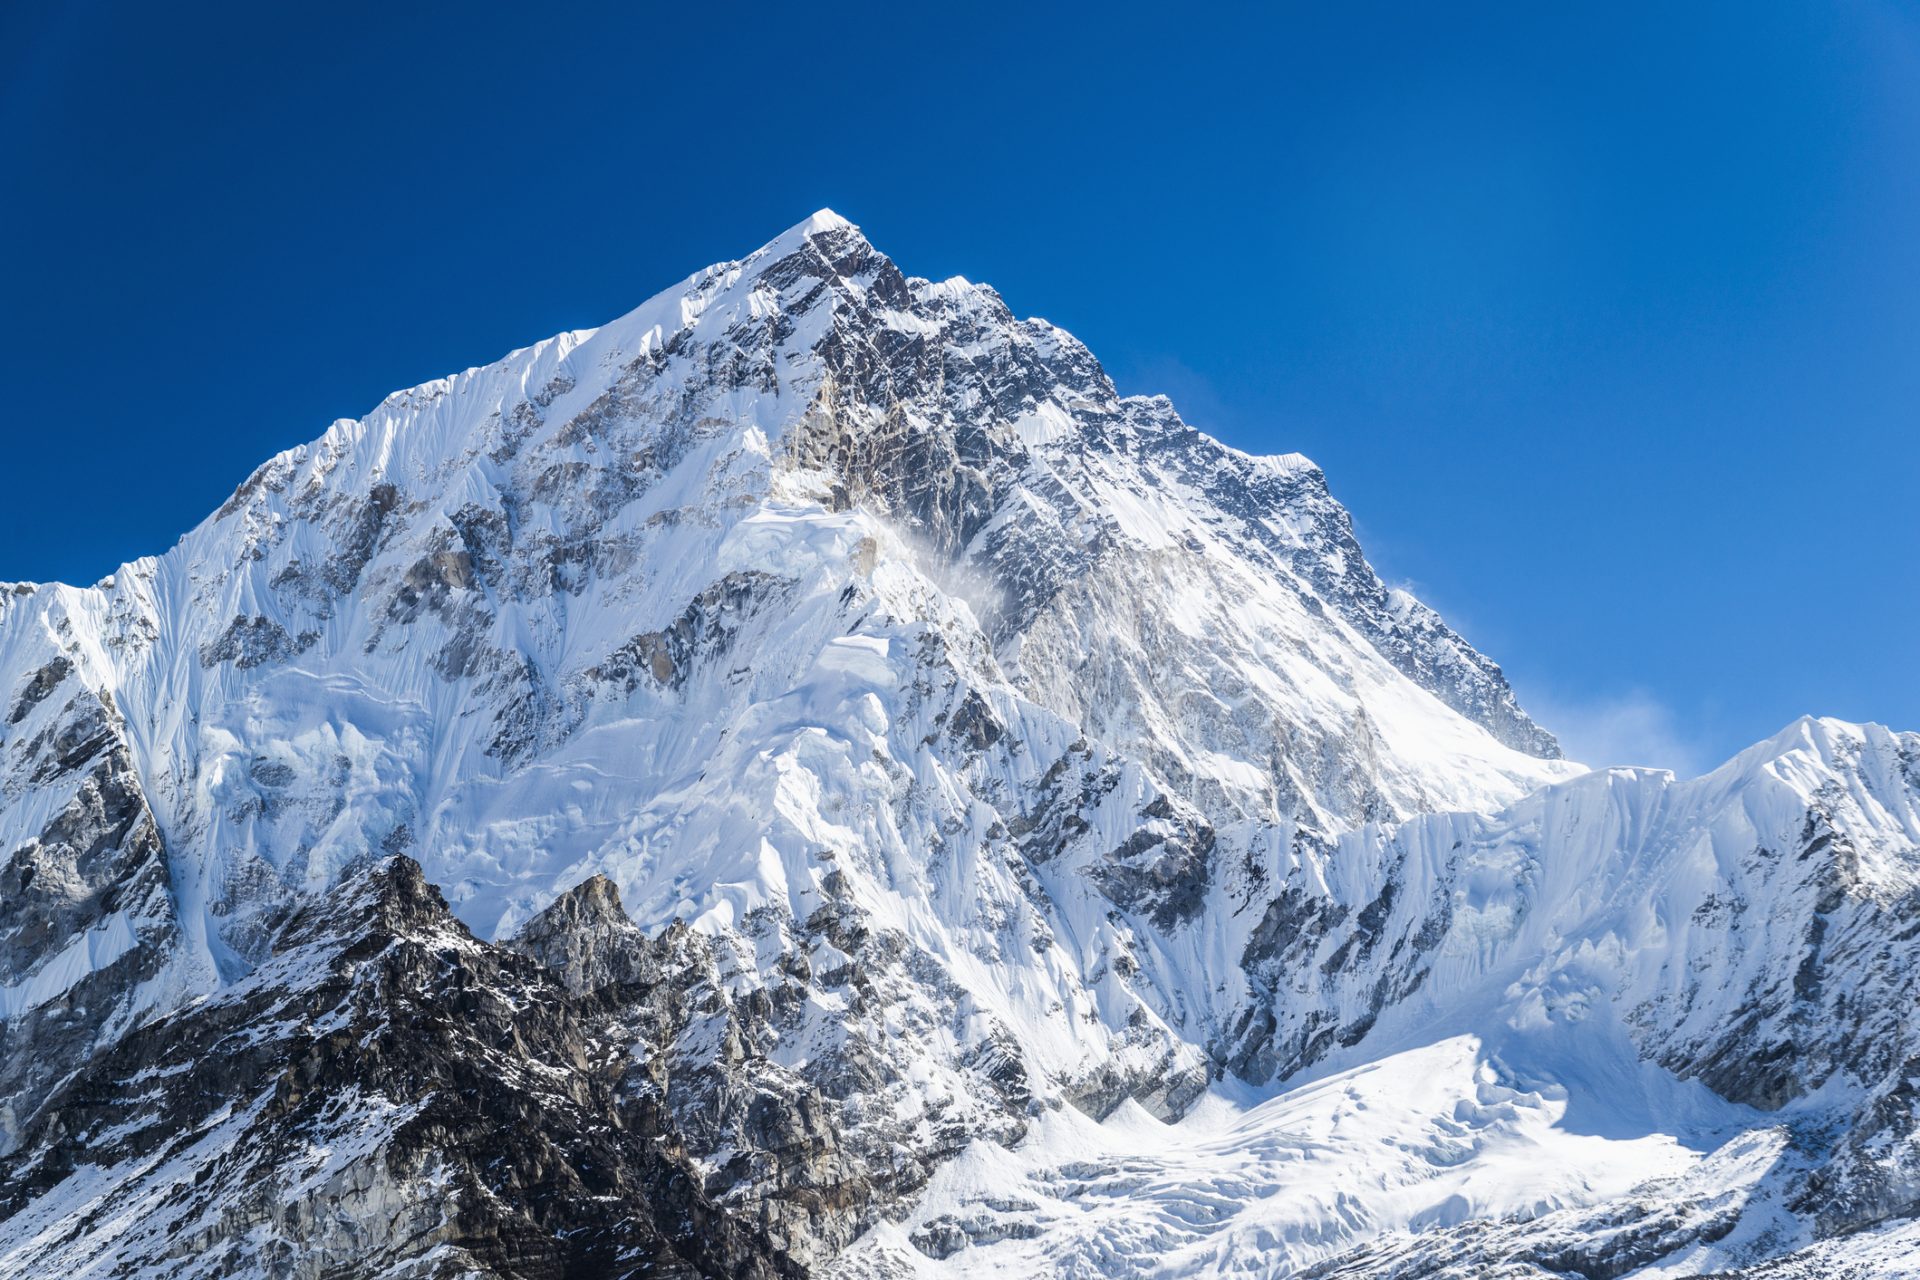 Is Mt. Everest really the tallest mountain?